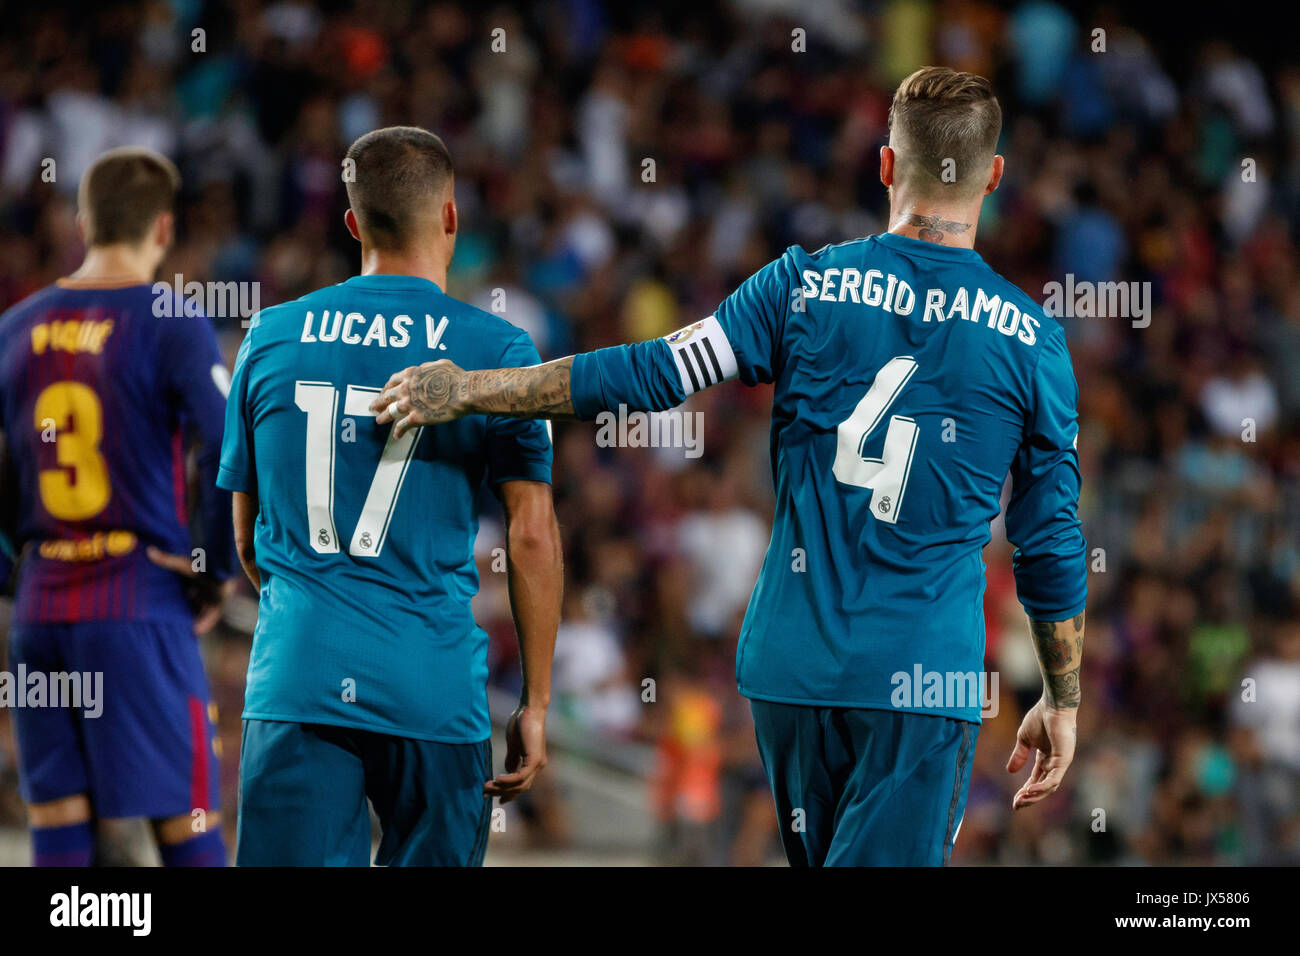 Camp Nou Stadium, Barcelona, Spain. 13th of August, 2017. Super Cup of Spain between FC Barcelona and Real Madrid. Sergio Ramos with Lucas Vázquez Credit: David Ramírez/Alamy Live News Stock Photo